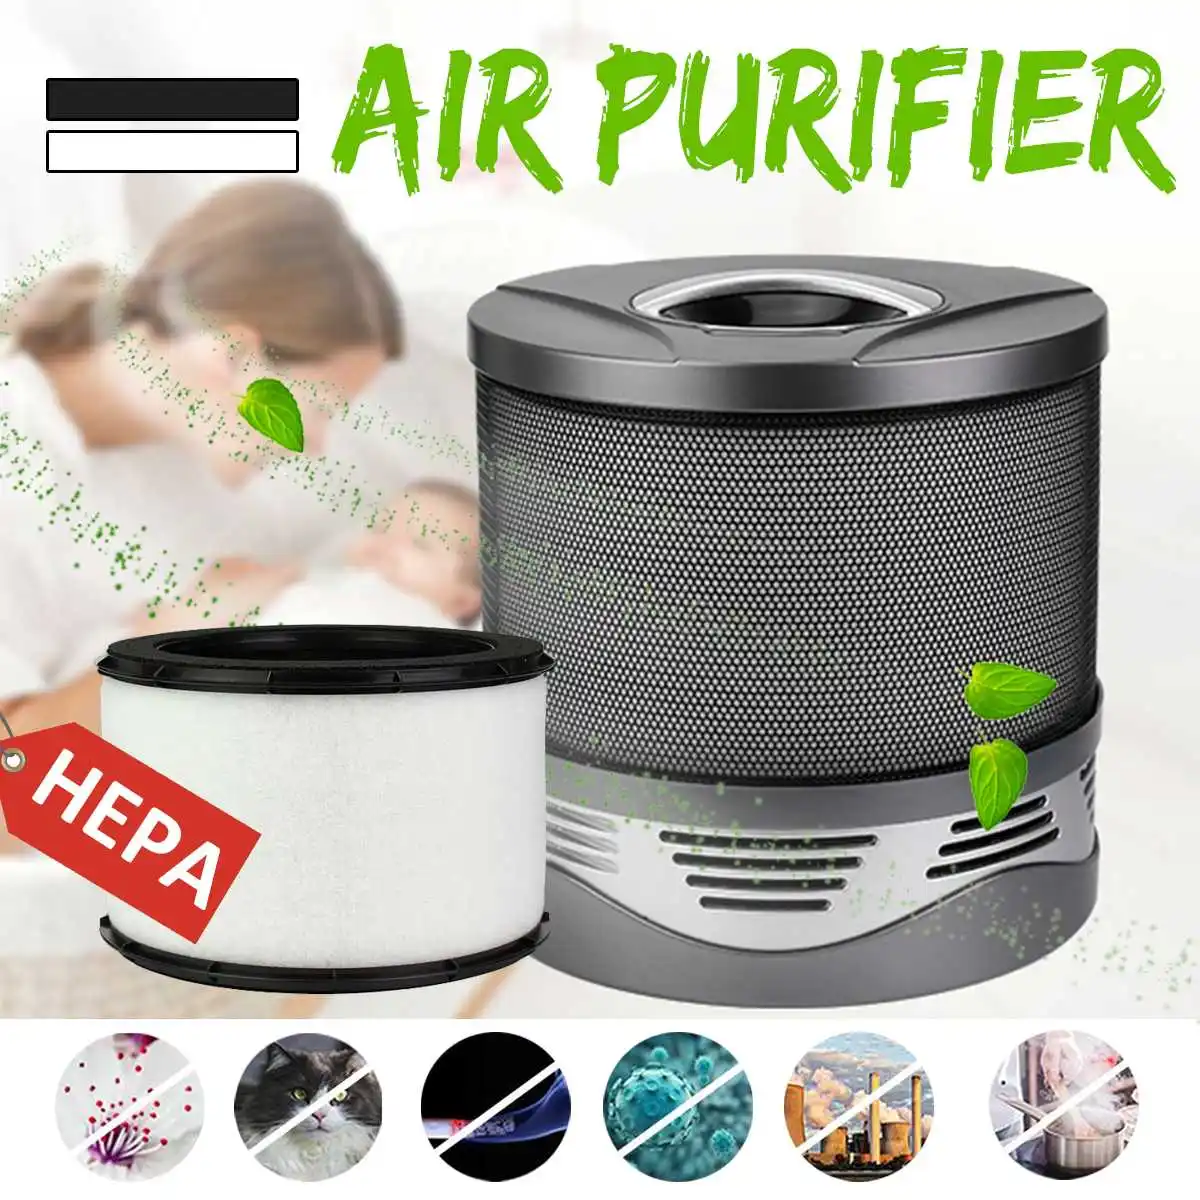 

Air Purifier For Home True HEPA Filters Compact Desktop Purifiers Filtration Dust PM2.5 Remover Air Cleaner Mini Ionic Purifiers